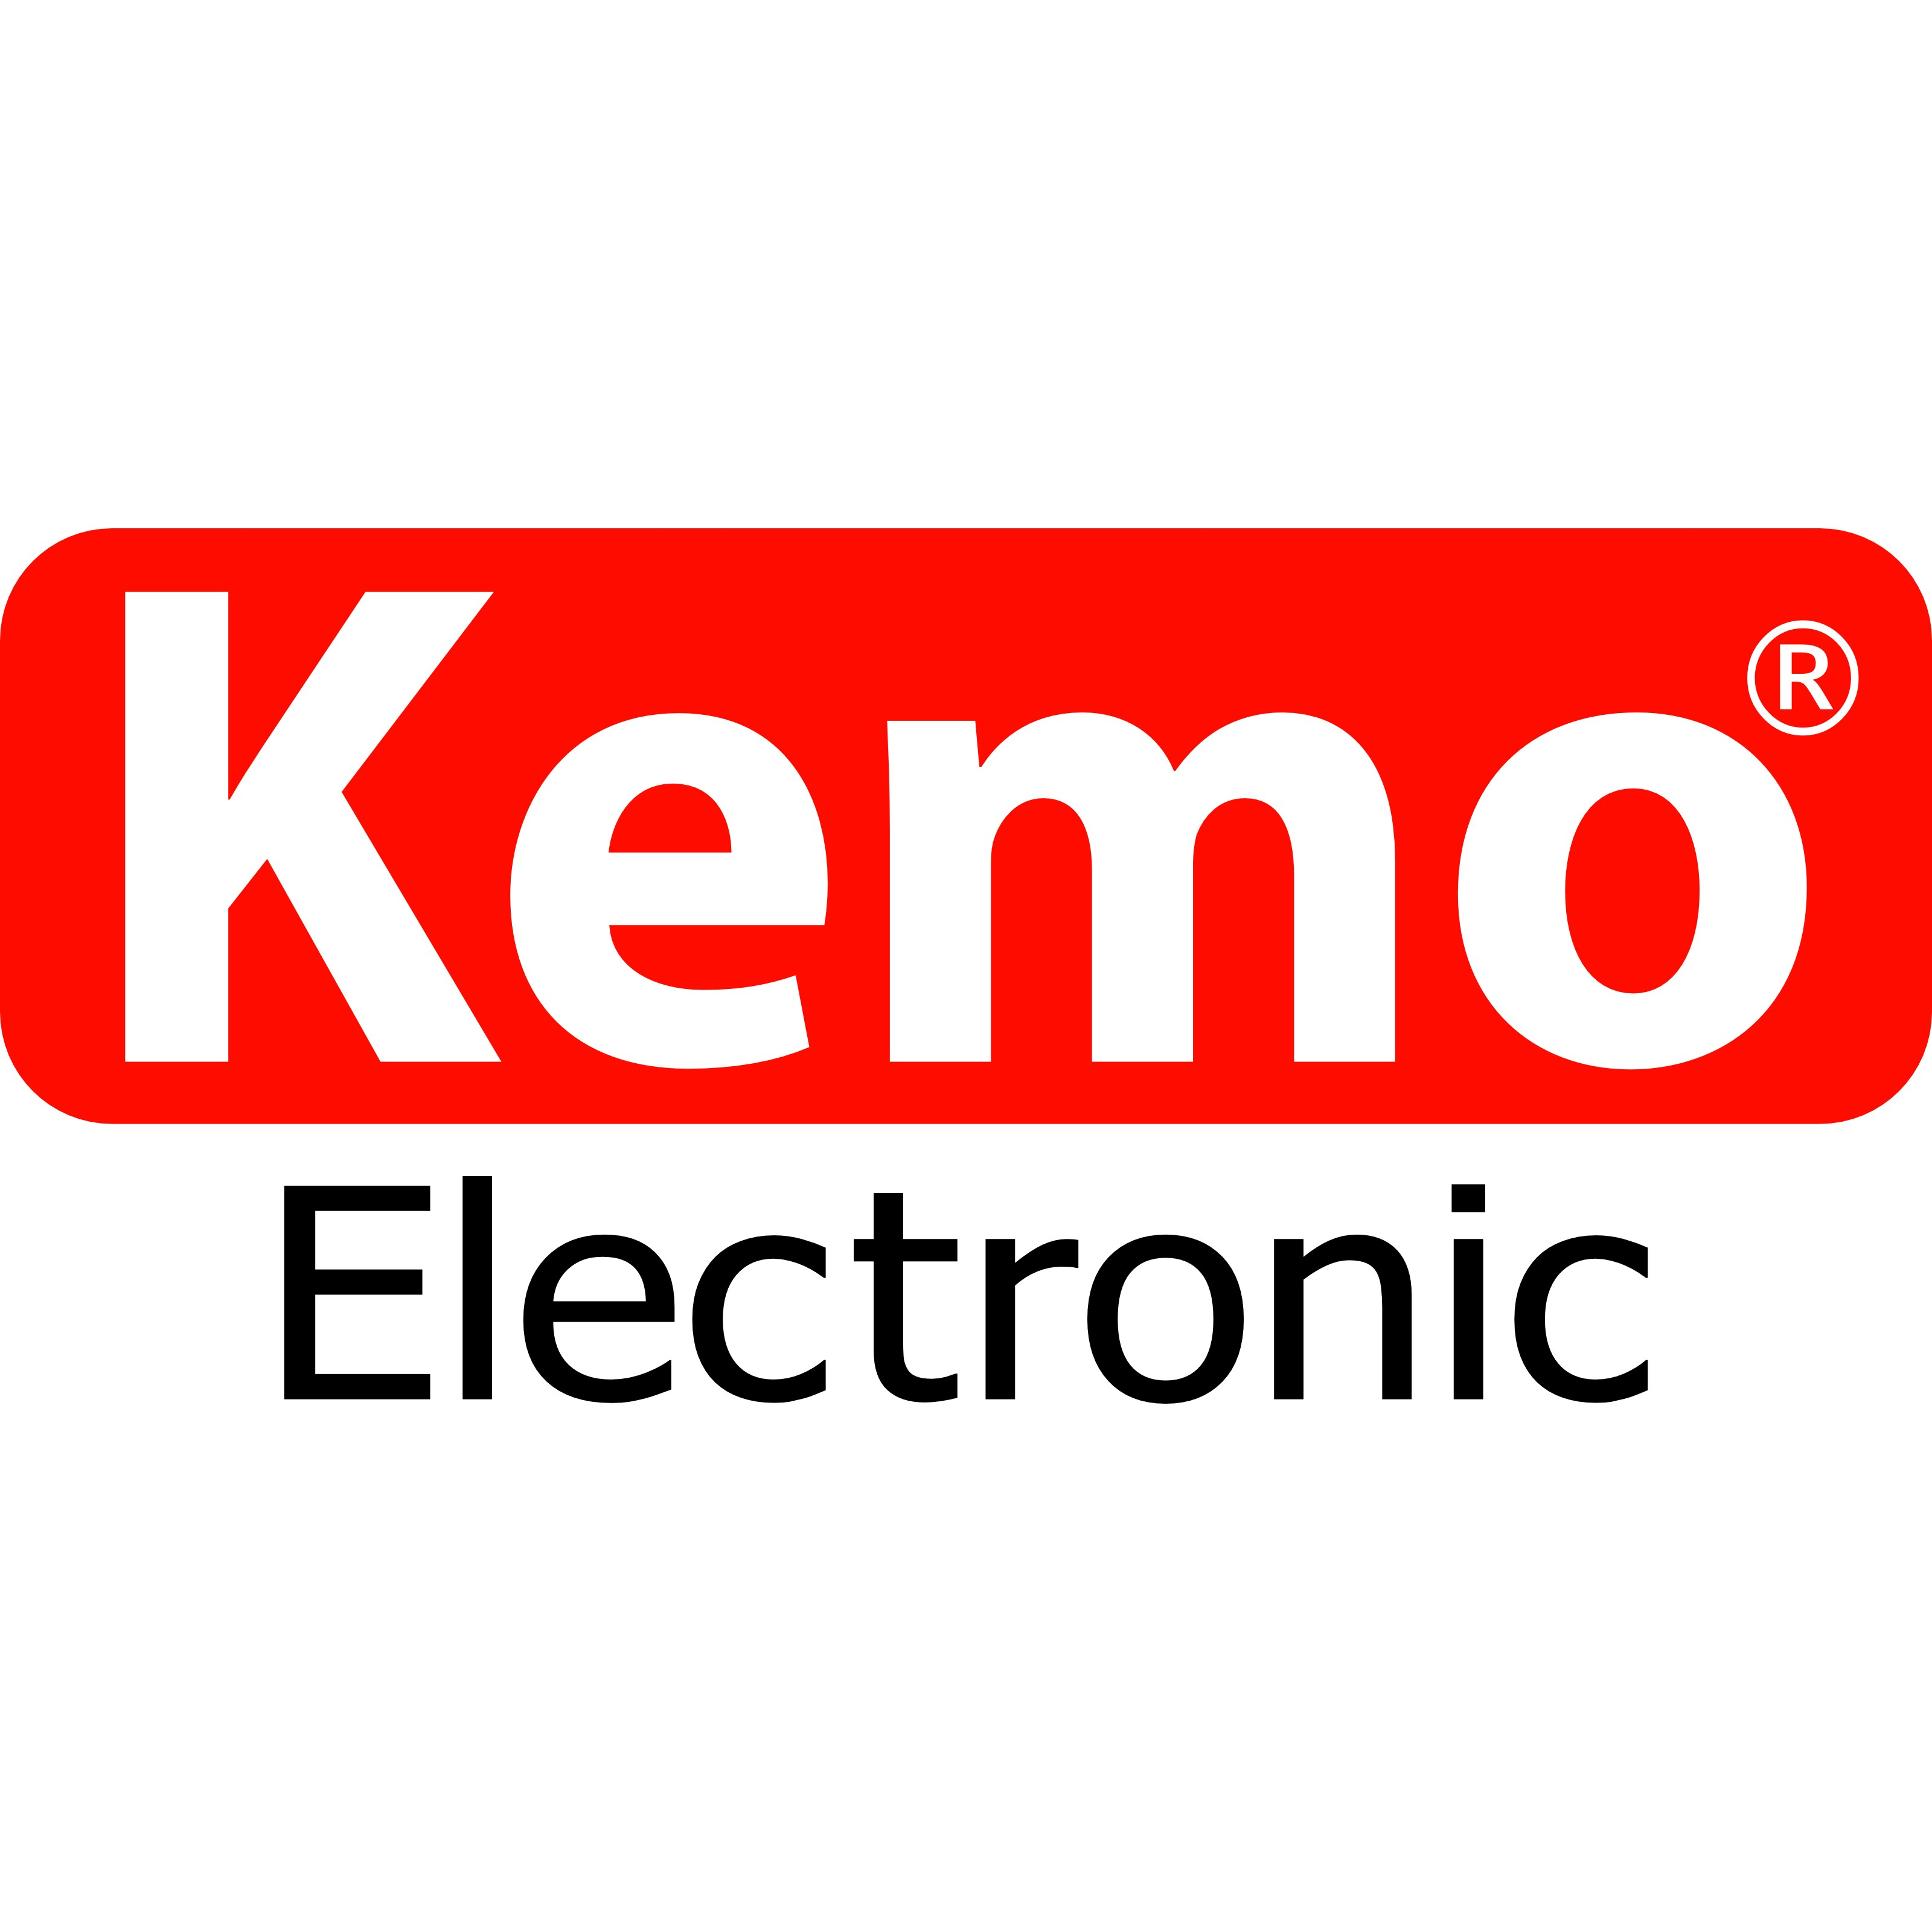 Kemo Electronic Products